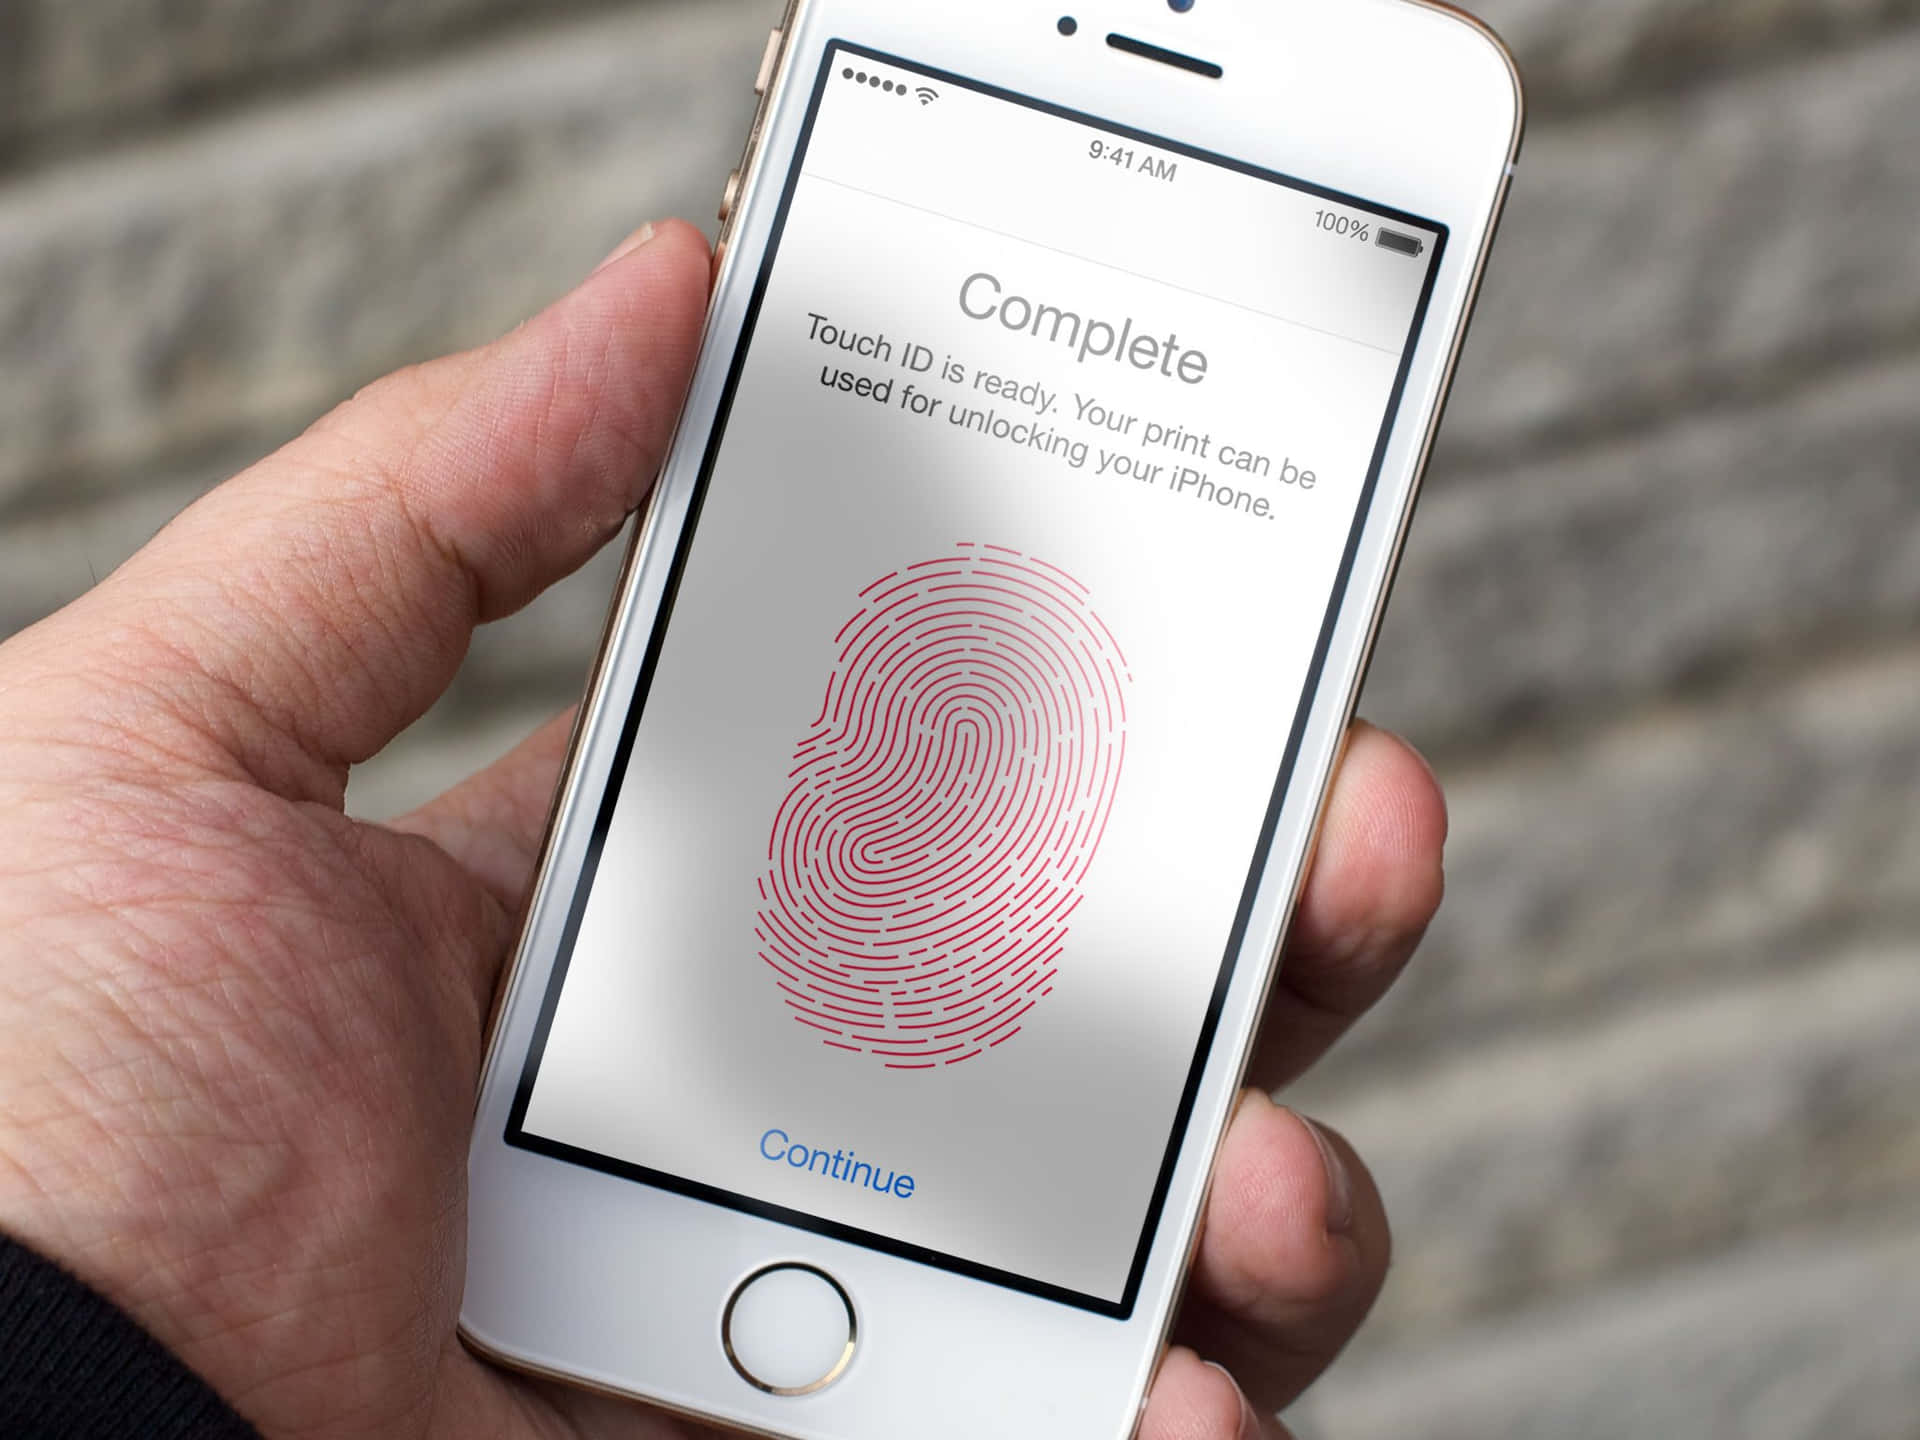 Touch ID security is the easiest way to unlock your device Wallpaper